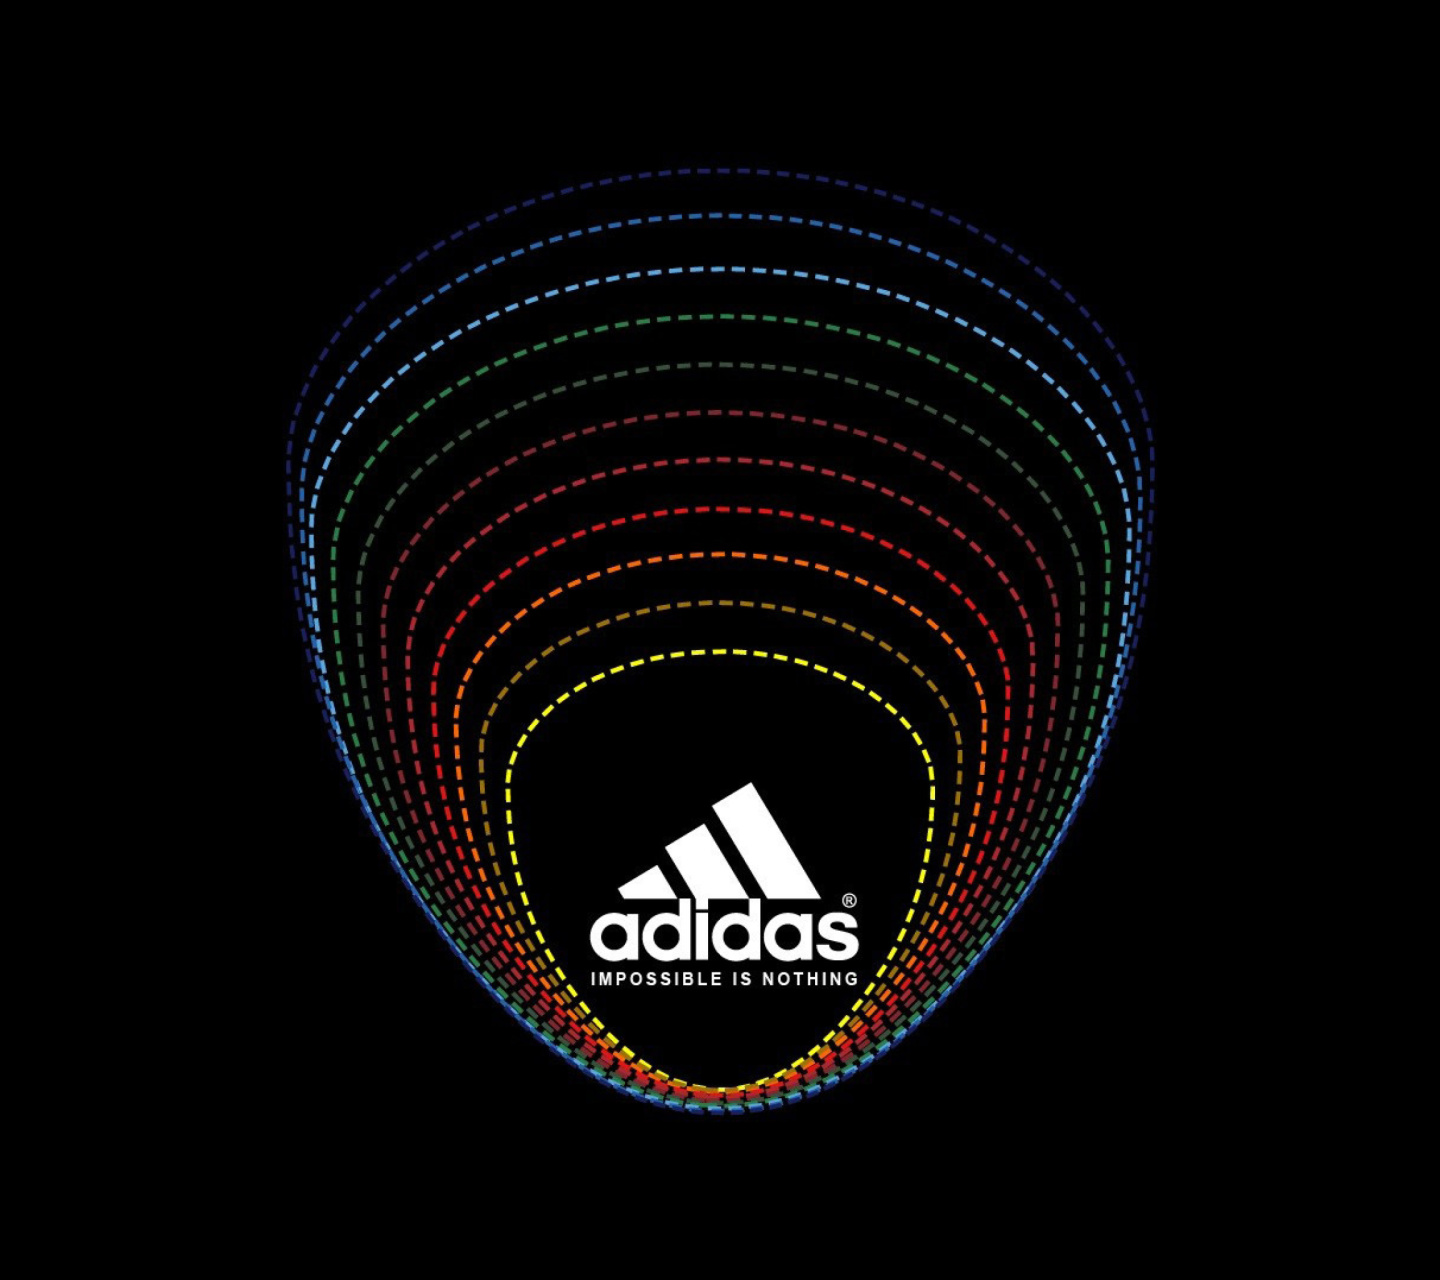 Adidas Tagline, Impossible is Nothing screenshot #1 1440x1280